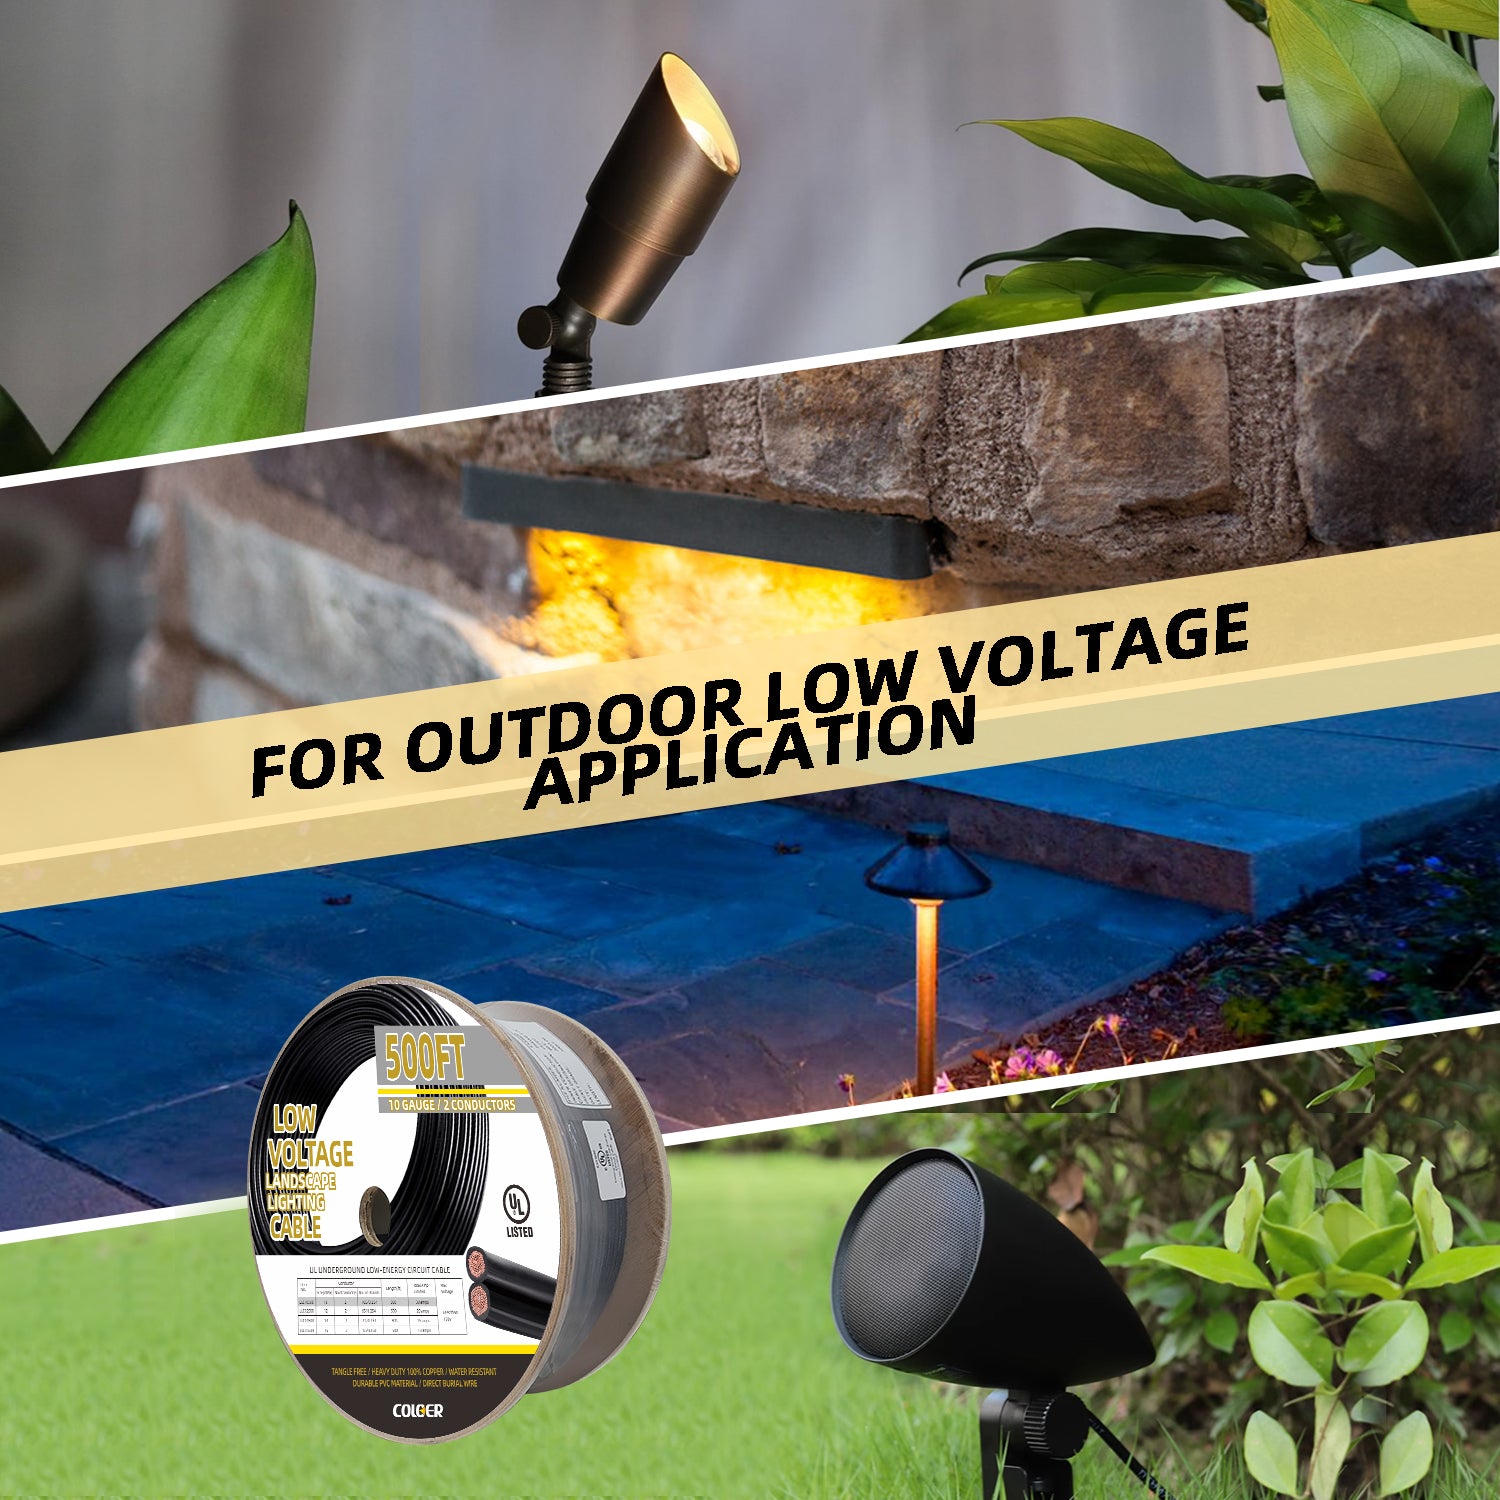 Various applications of outdoor low voltage lighting including LED spotlight, hardscape lights on stone wall with text 'FOR OUTDOOR LOW VOLTAGE APPLICATION', roll of 500 feet low voltage landscape wire, and path light installed in grass.